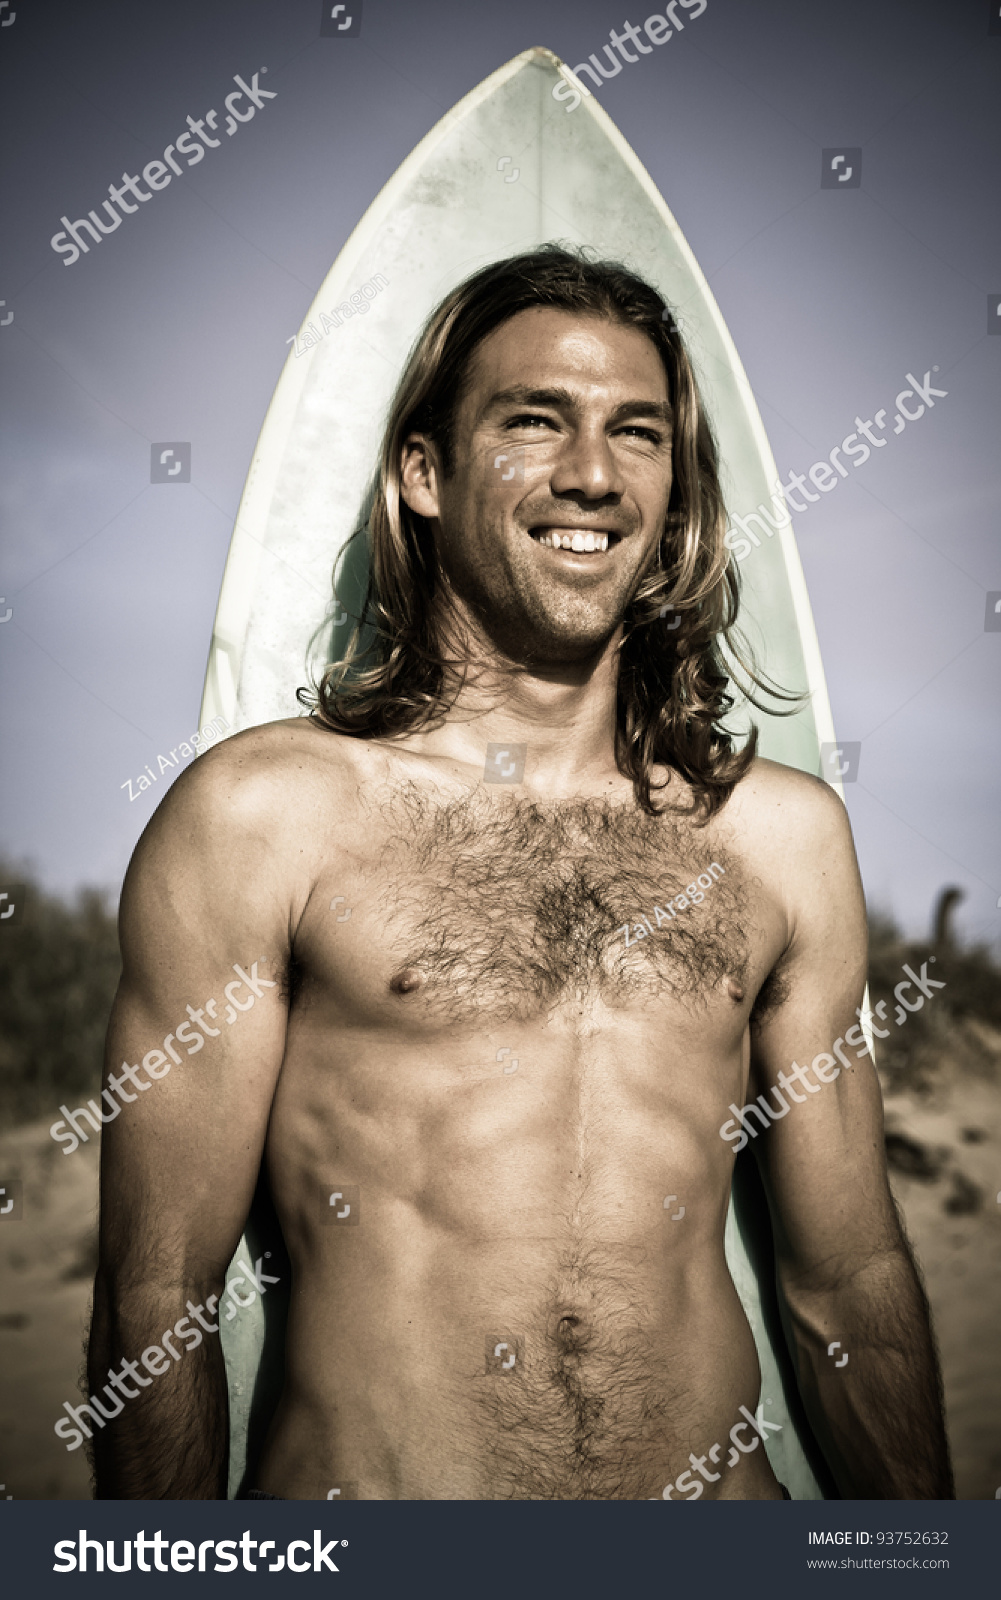 Attractive Handsome Muscular Long Haired Surfer Stock Photo Shutterstock